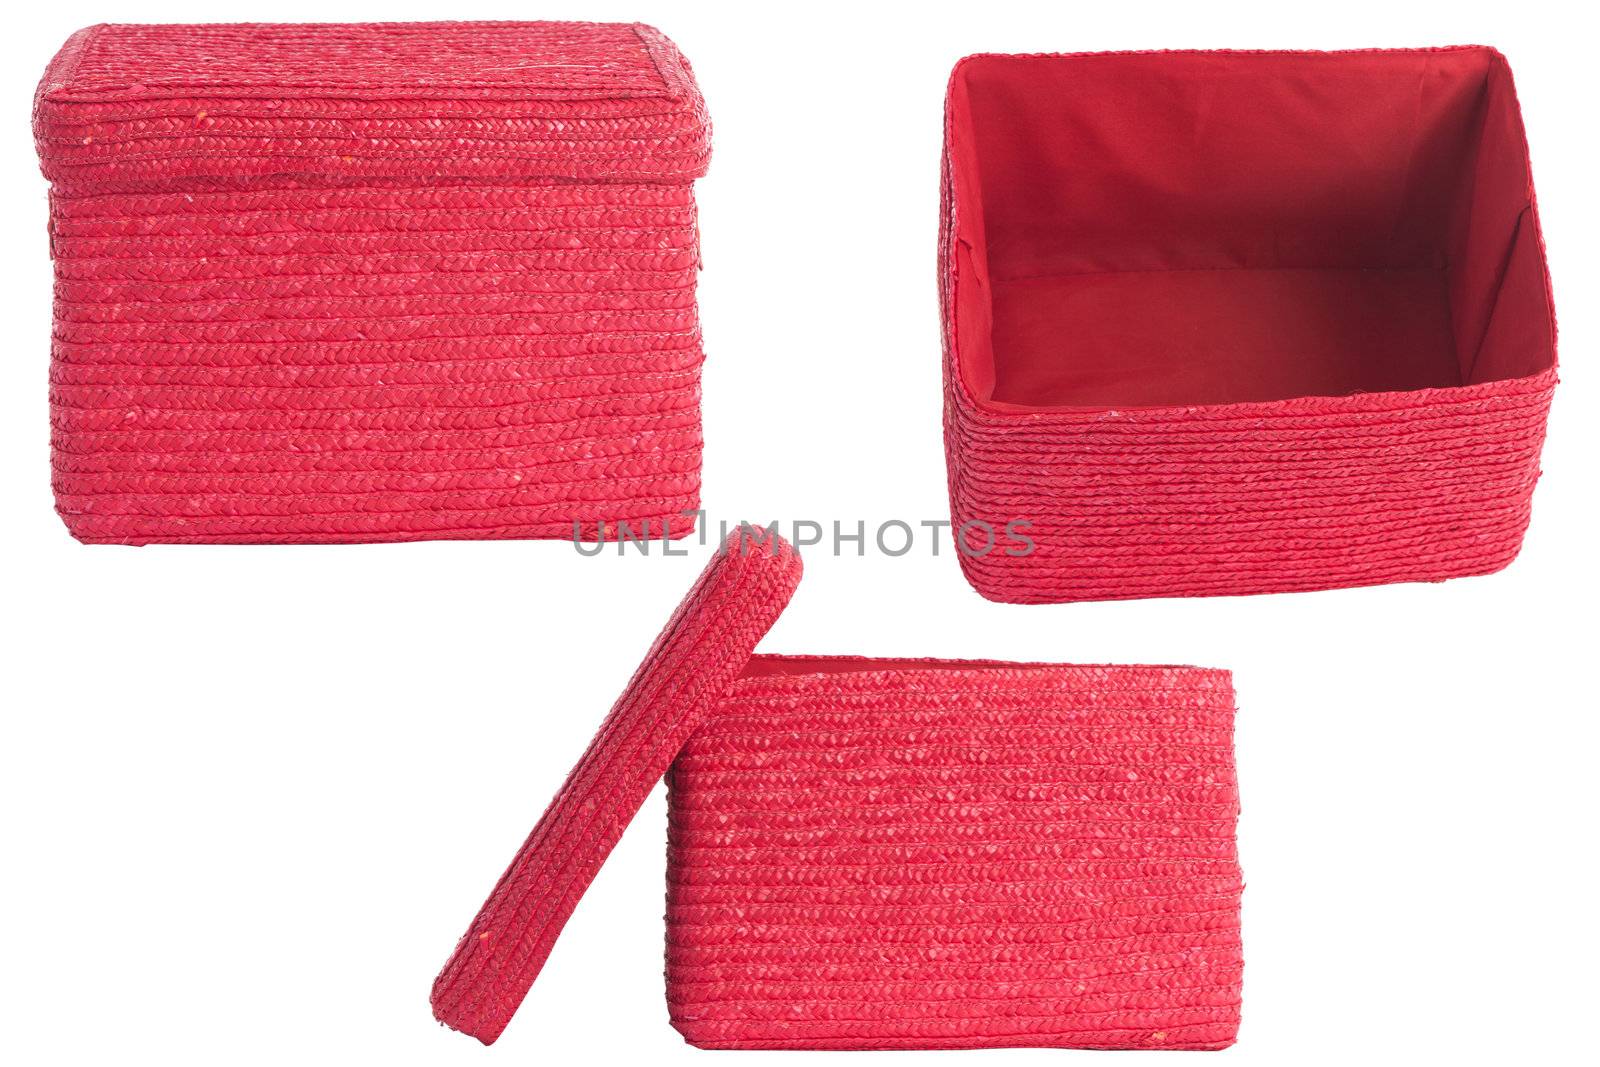 decorative red wicker basket with lid by VictorO